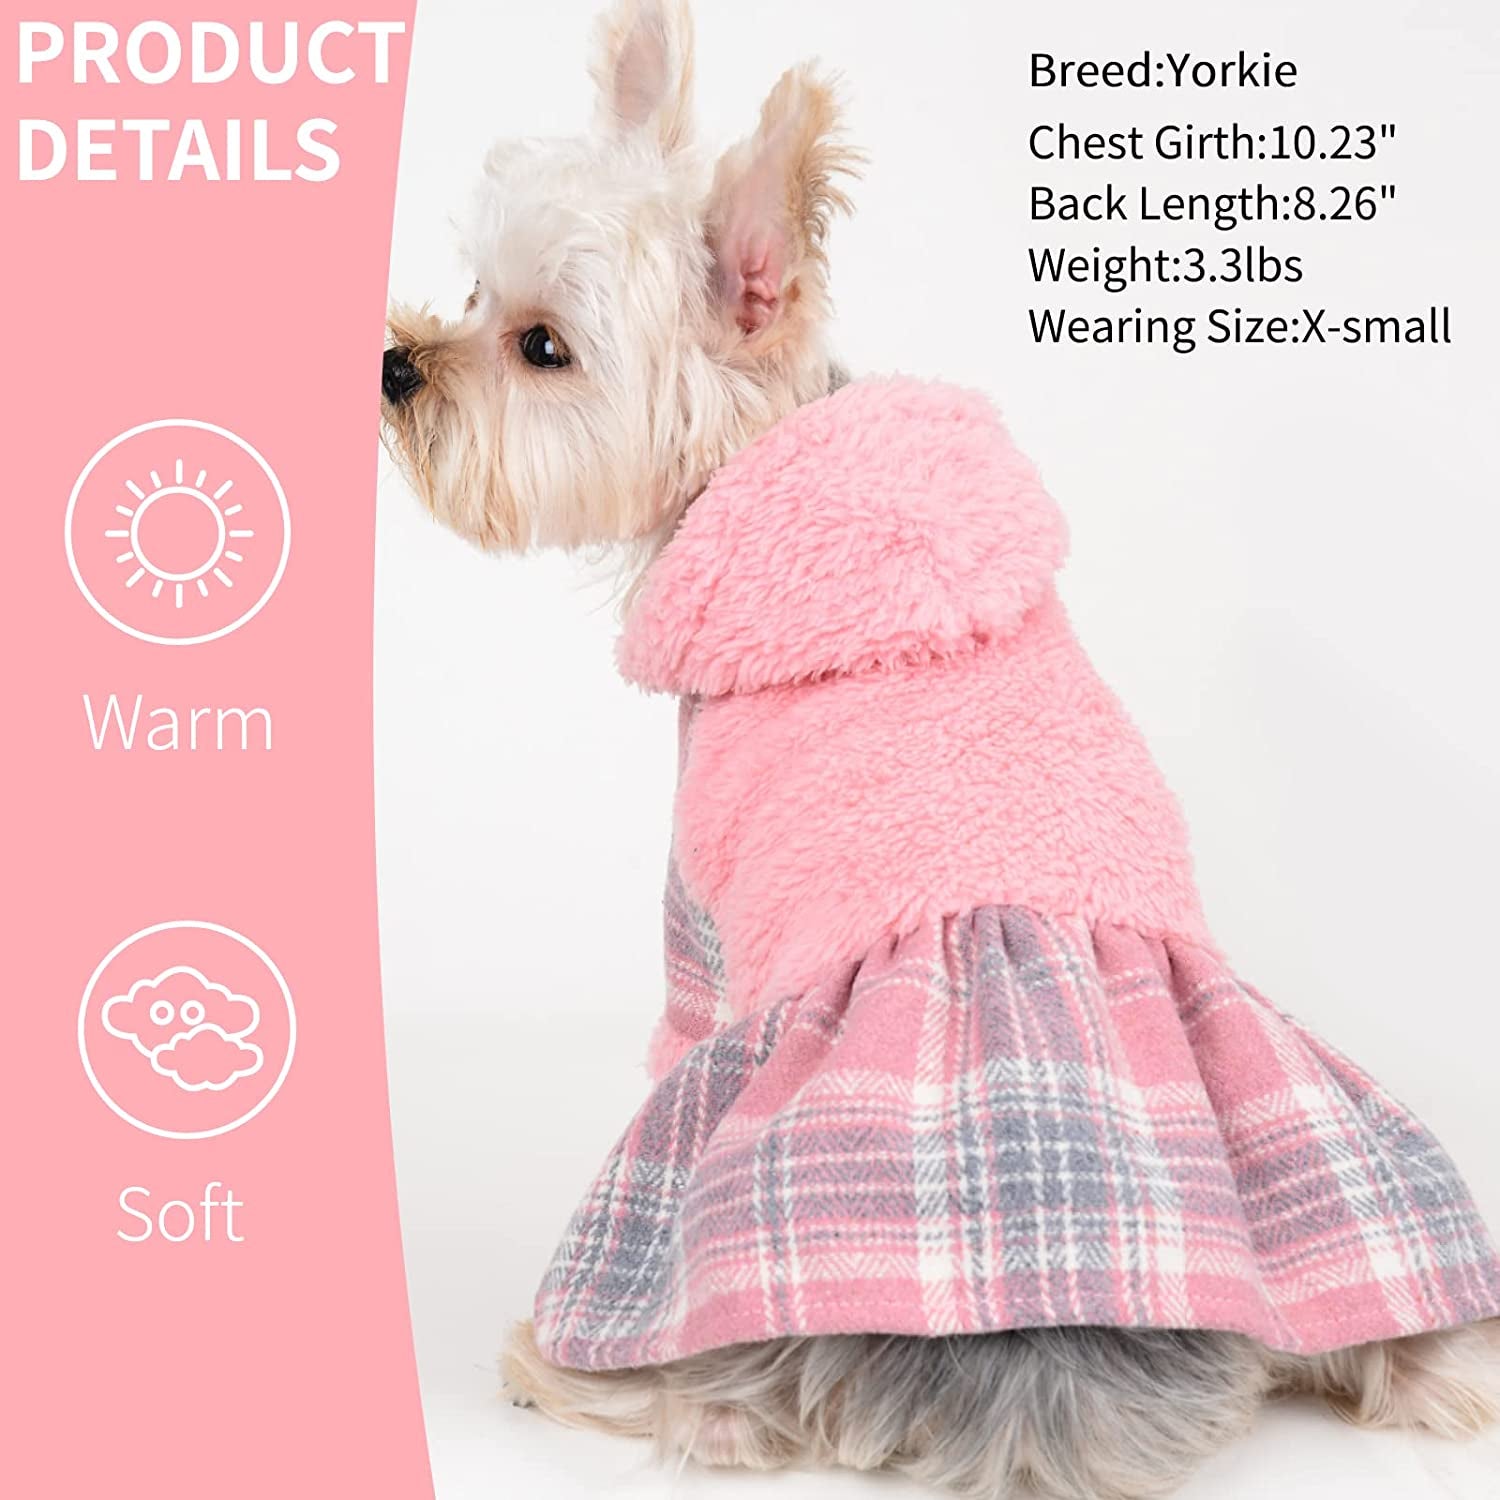 Dog Clothes for Small Dogs Boy Girl, Double-Sided Fleece Dog Clothes Vest,  Stretchy XSmall Dog Sweater Pet Clothes, Reflective Plaid Chihuahua Teacup Puppy  Clothes (X-Small Bust 11.02) X-Small (Bust11.02 in) Plaid Grey